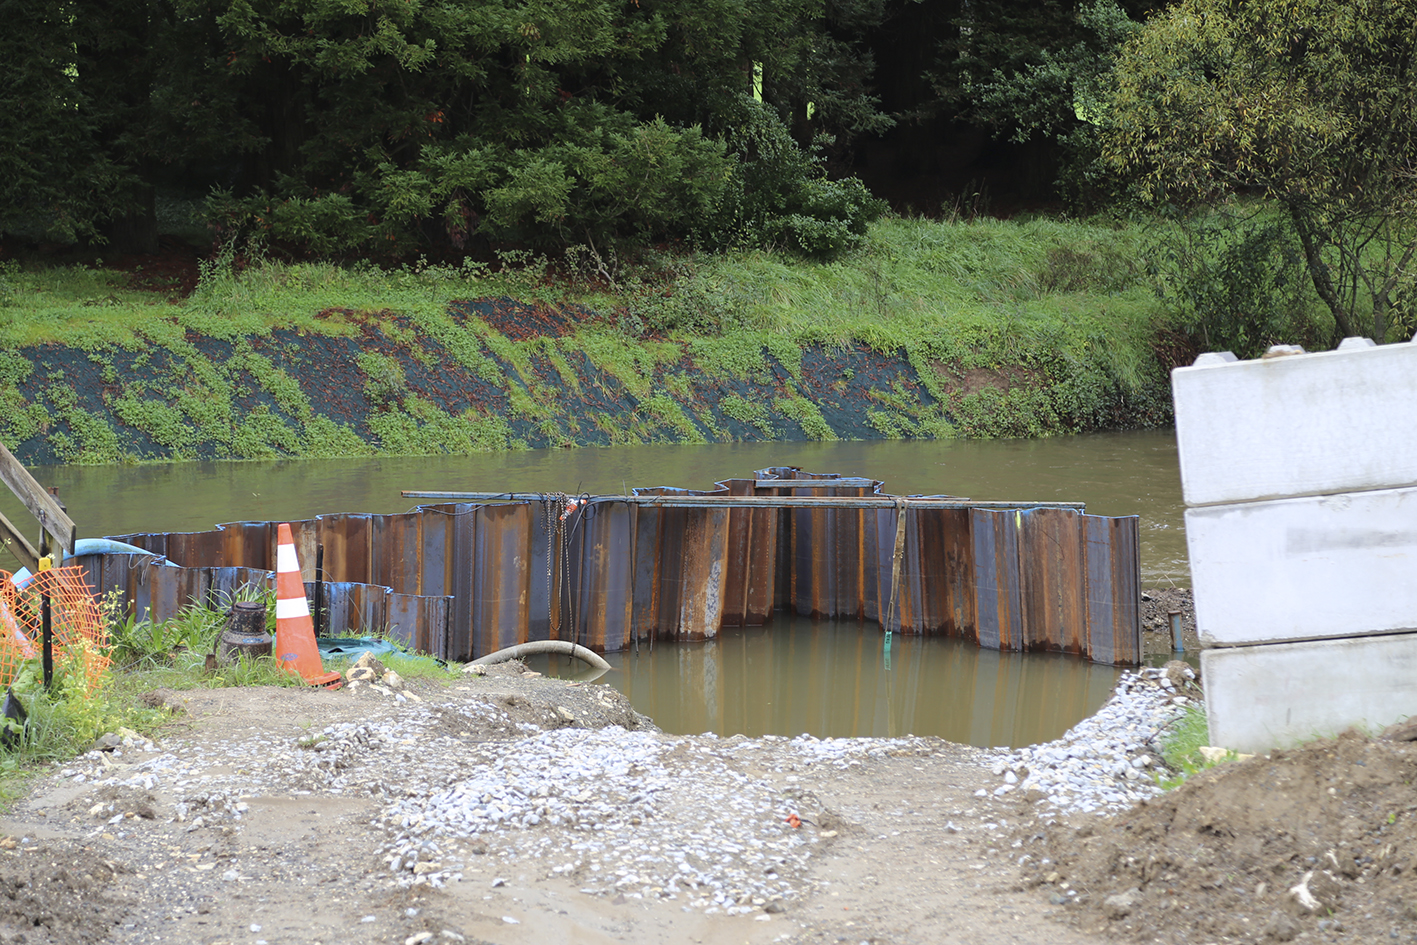 Sheet piling is being used to keep the river water out of the work site.